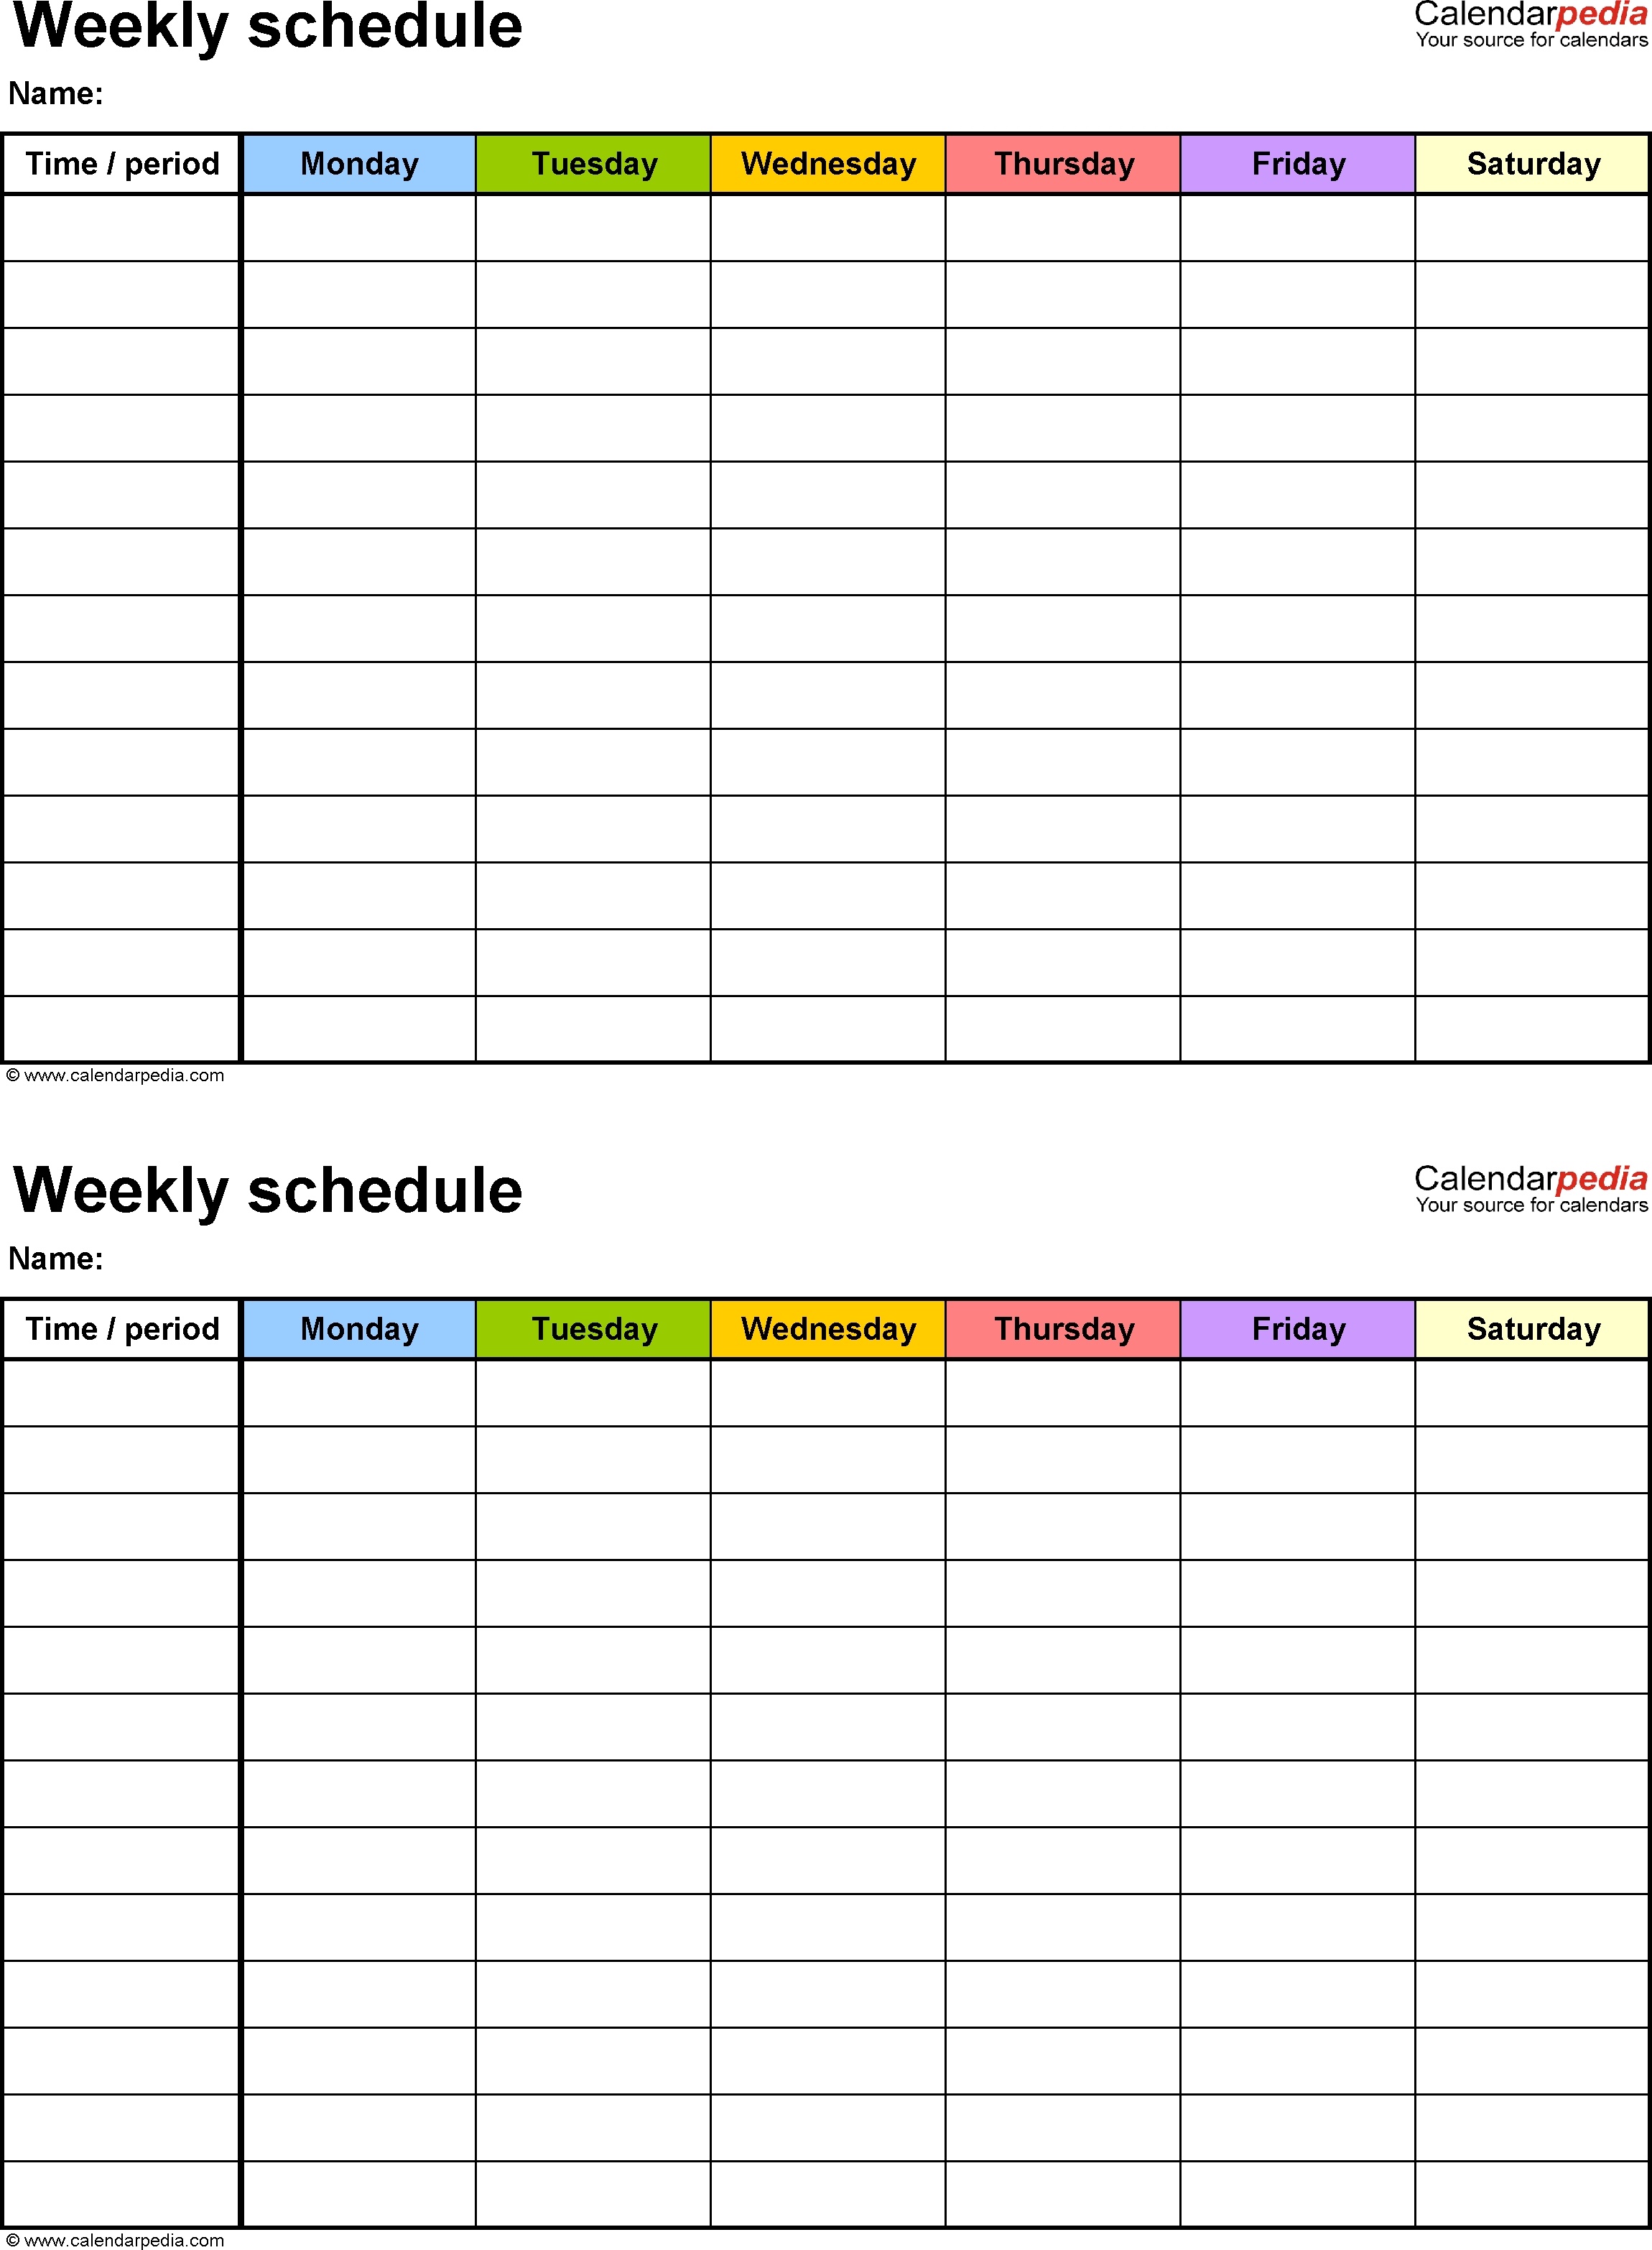 Free Weekly Schedule Templates For Word - 18 Templates-Monday To Friday 2 Week Calendar Template